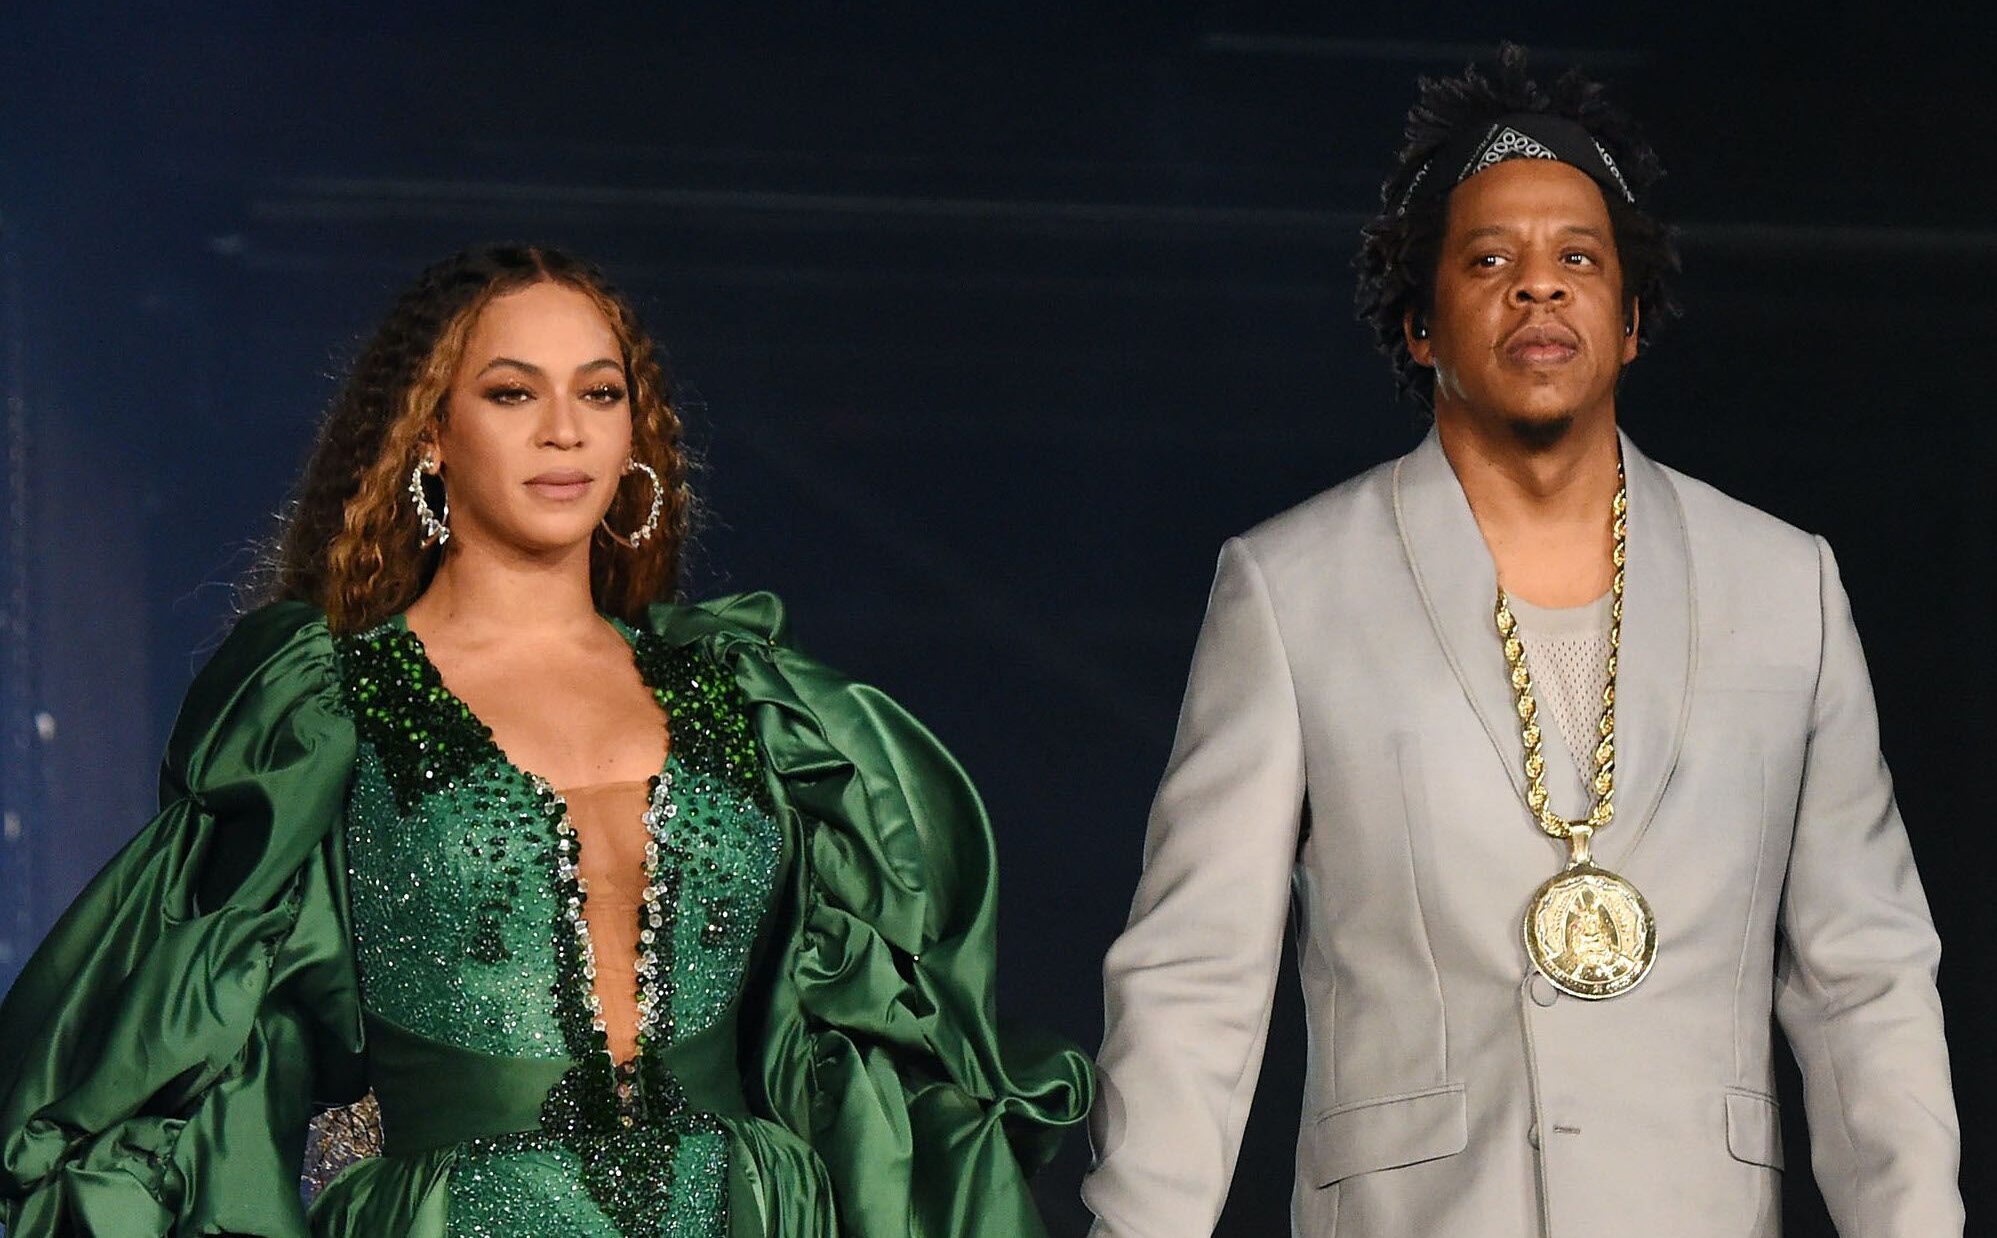 Jay-Z Says He Likes Working With Beyoncé Because She's 'Super Talented'